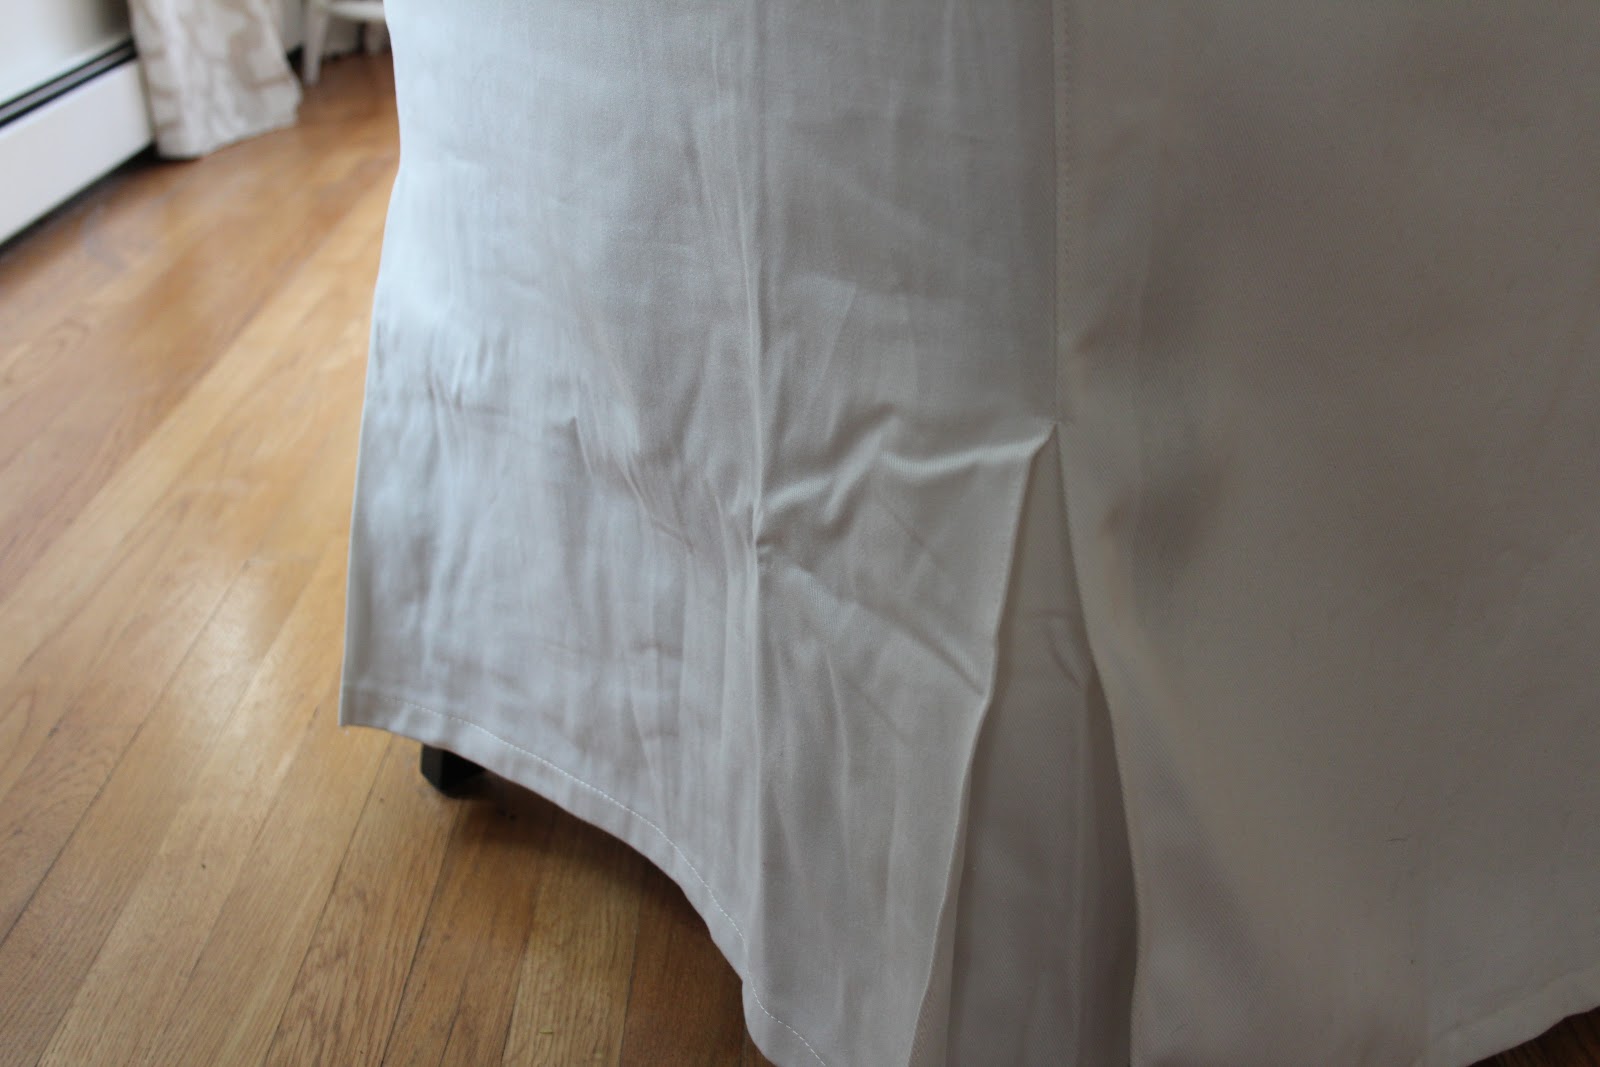 Getting The Wrinkles Out Of Slipcovers - Shine Your Light